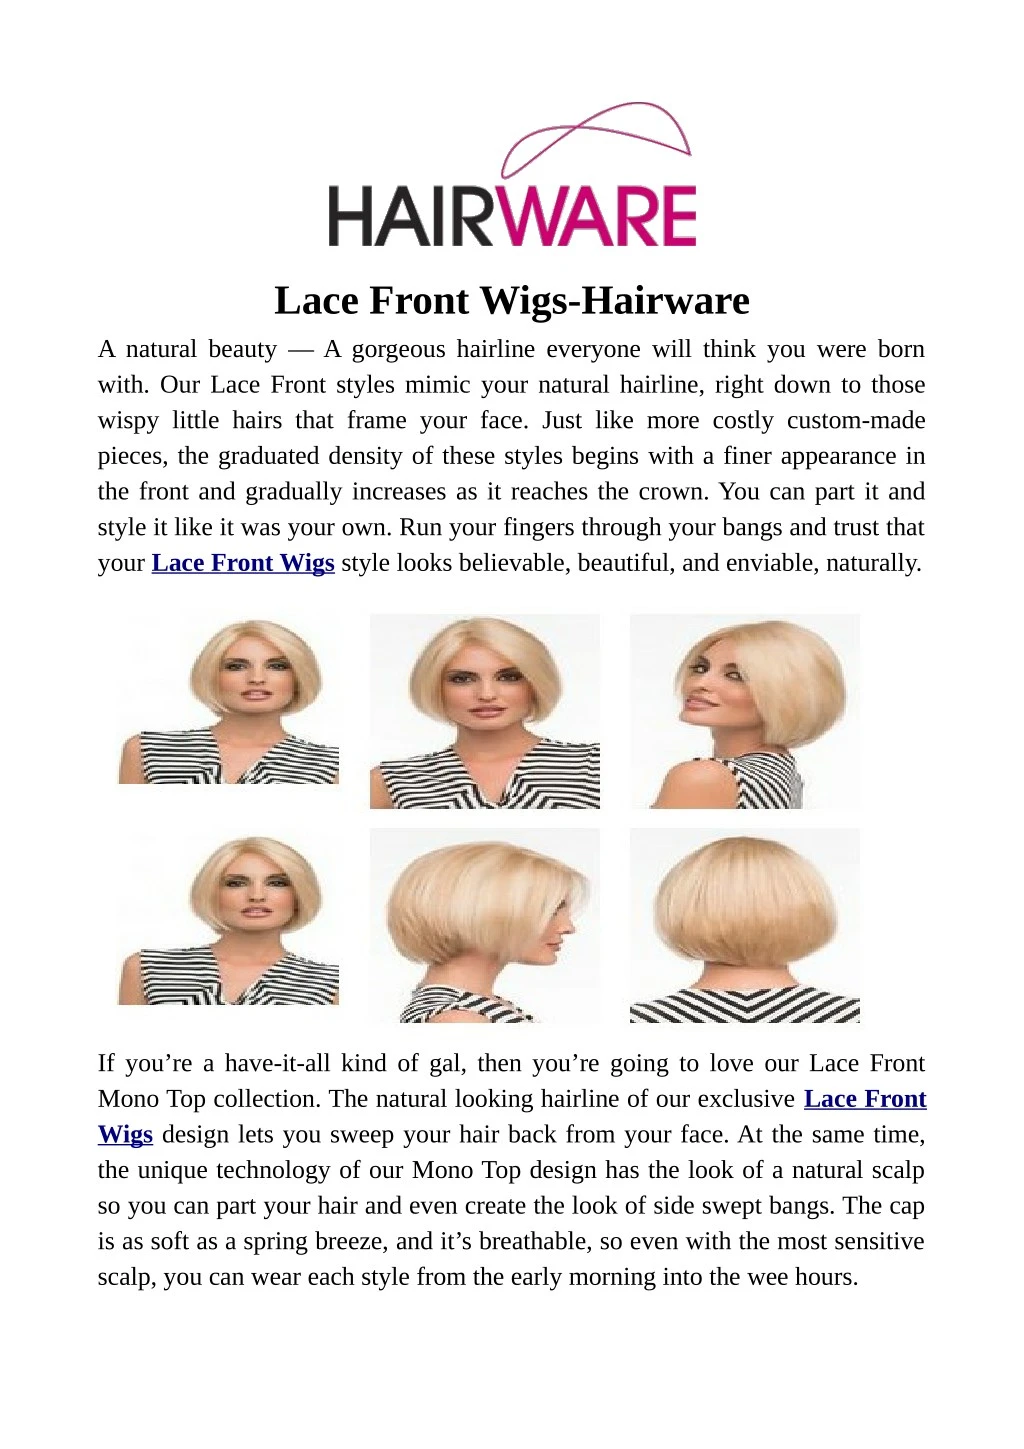 lace front wigs hairware a natural beauty